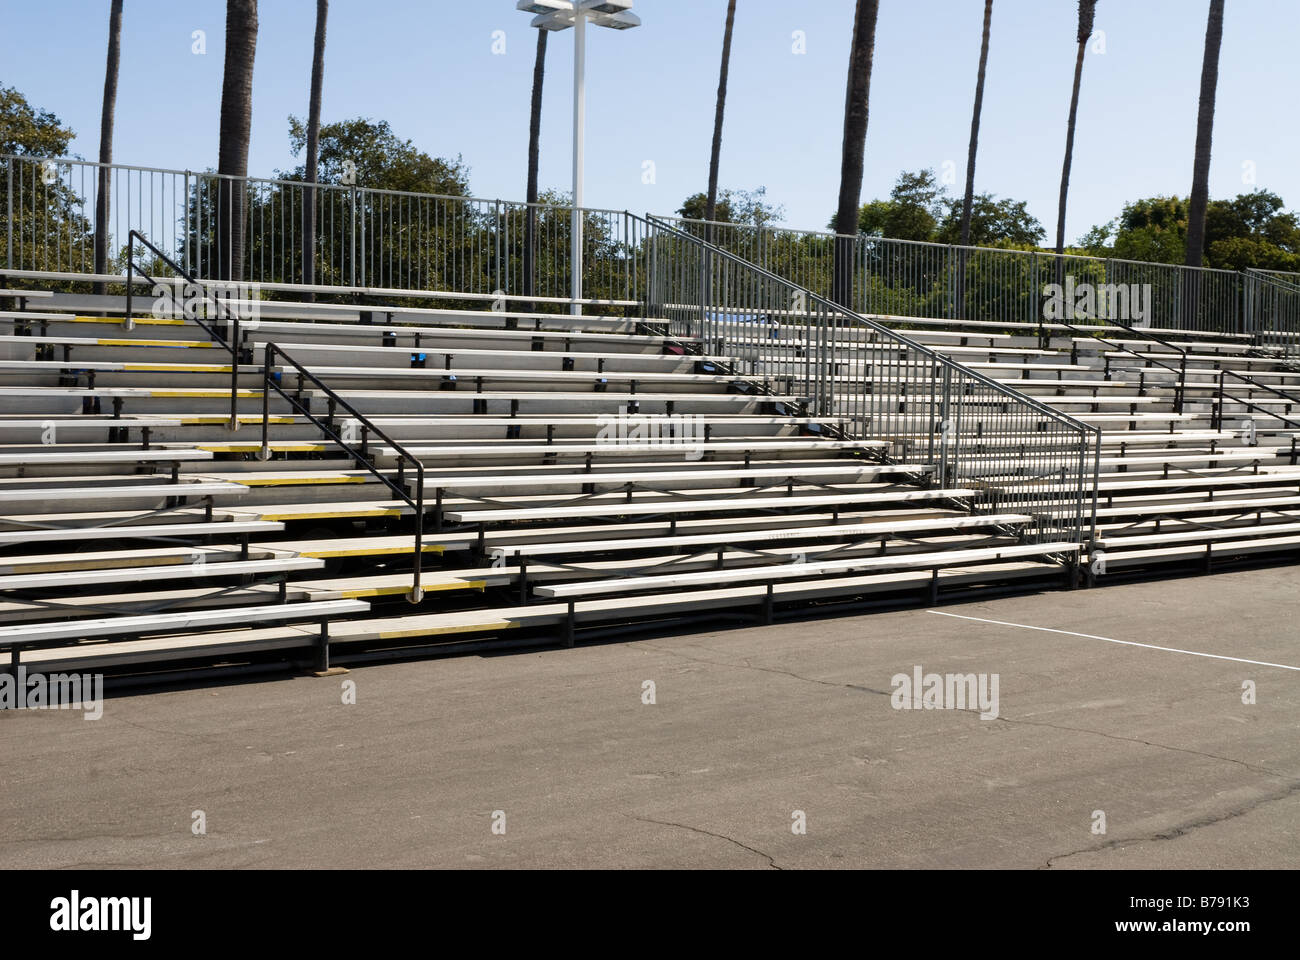 Empty bleachers during the daytime before an event Stock Photo